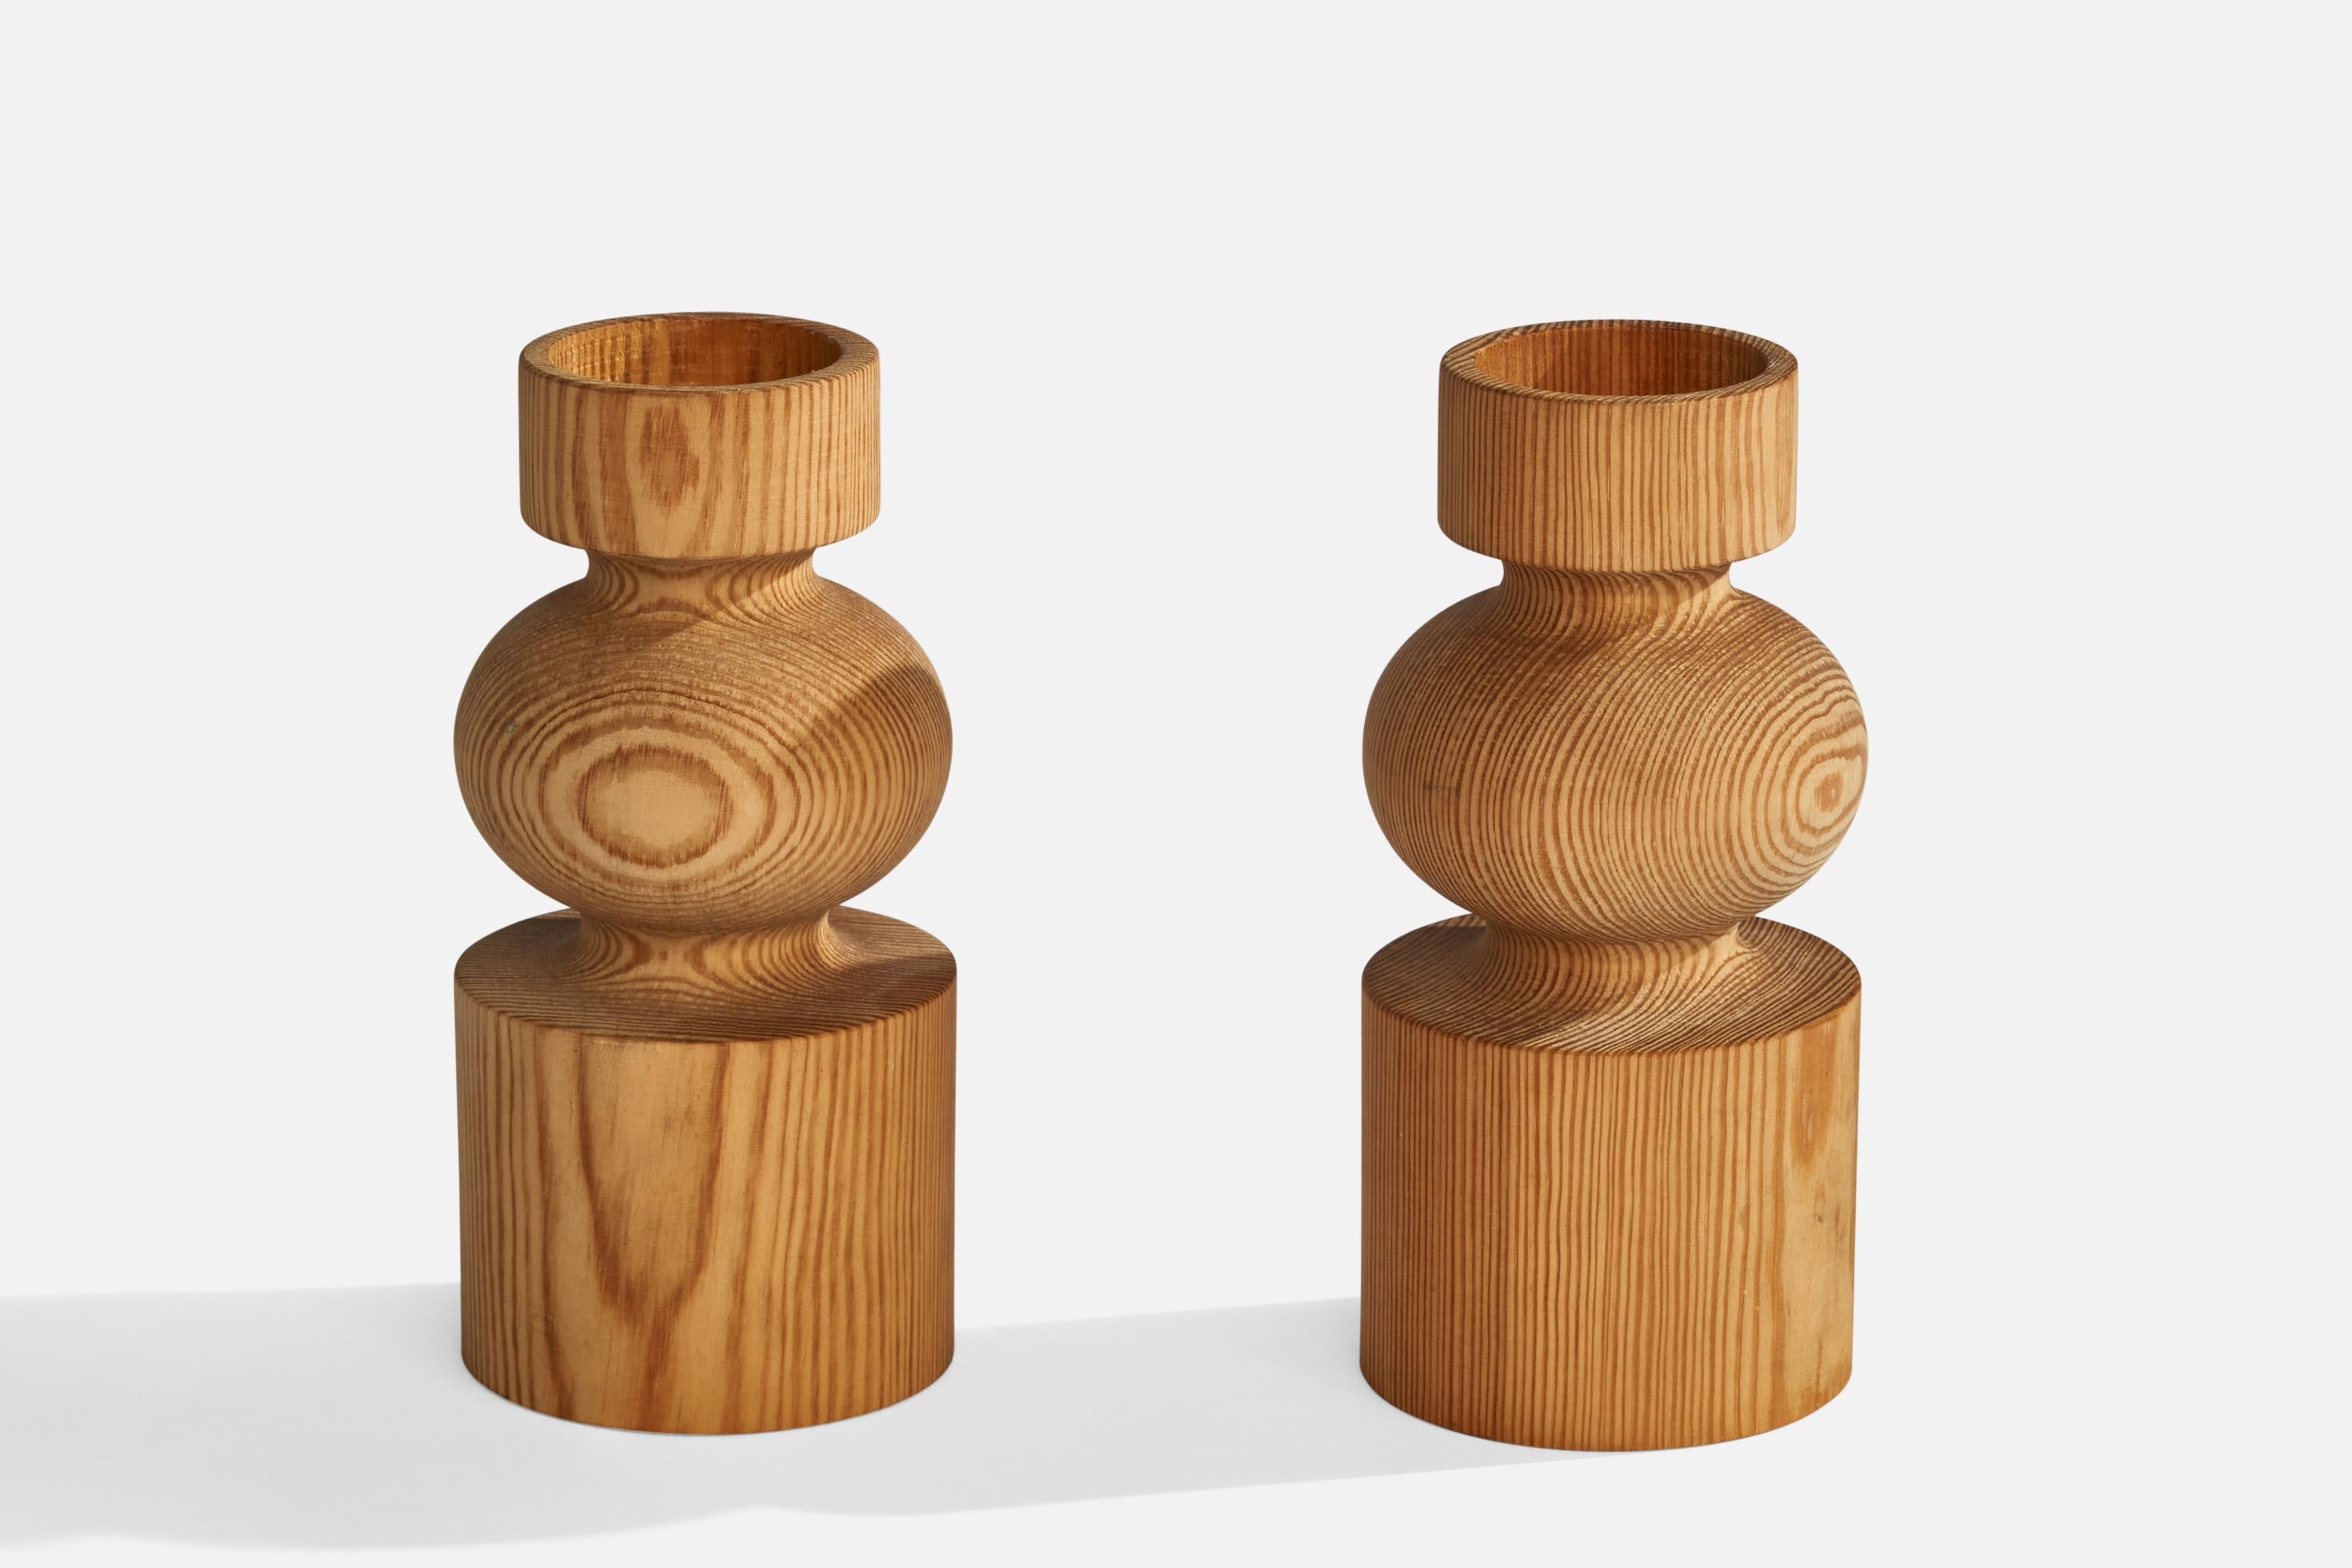 A pair of pine candlesticks or storm light holders designed by Uno and Östen Kristiansson and produced by Luxus Vittsjö, Sweden, 1970s.

Holds 2.0” diameter candles